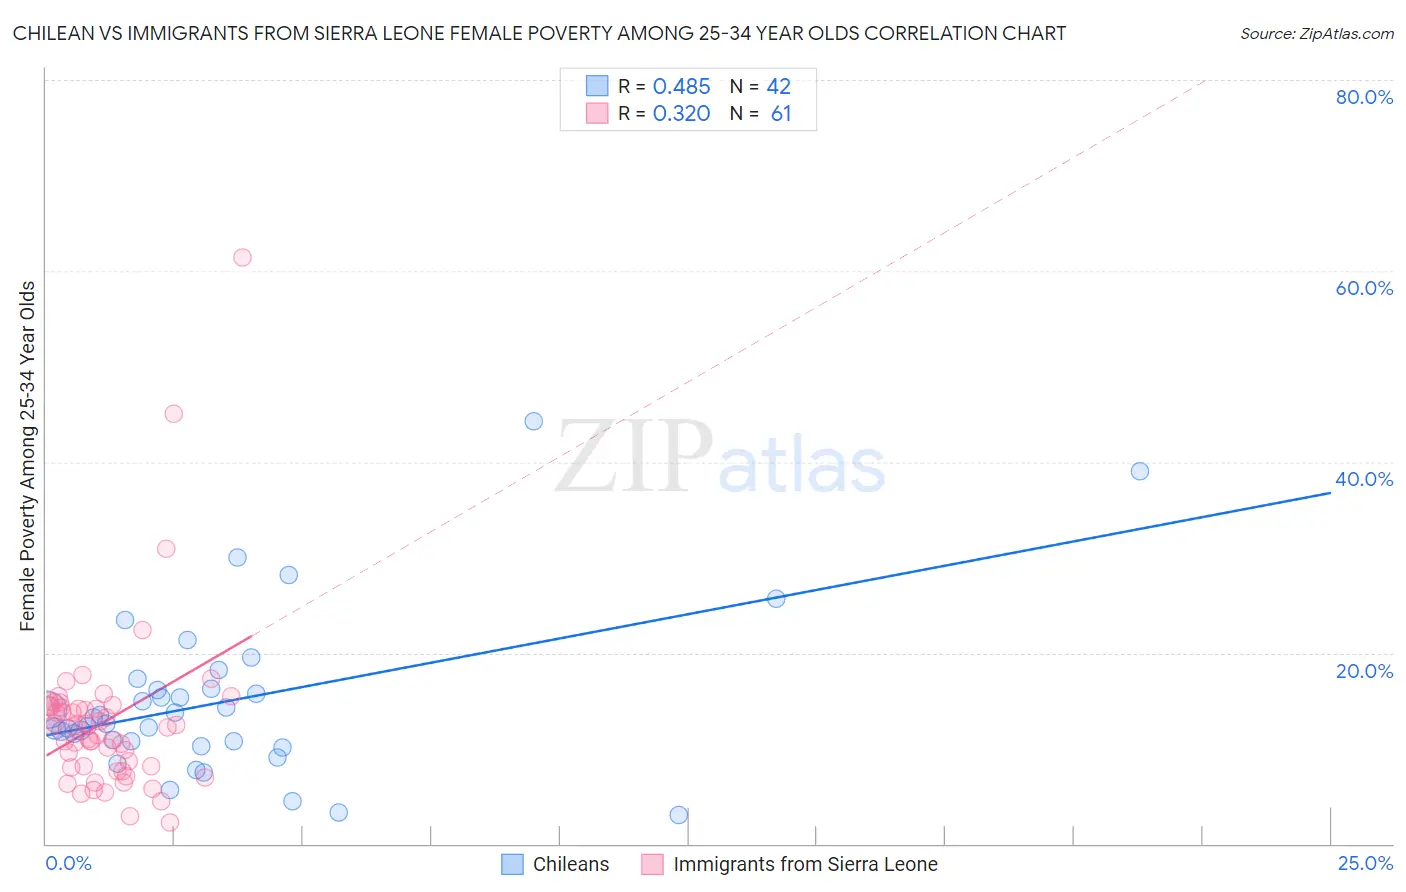 Chilean vs Immigrants from Sierra Leone Female Poverty Among 25-34 Year Olds